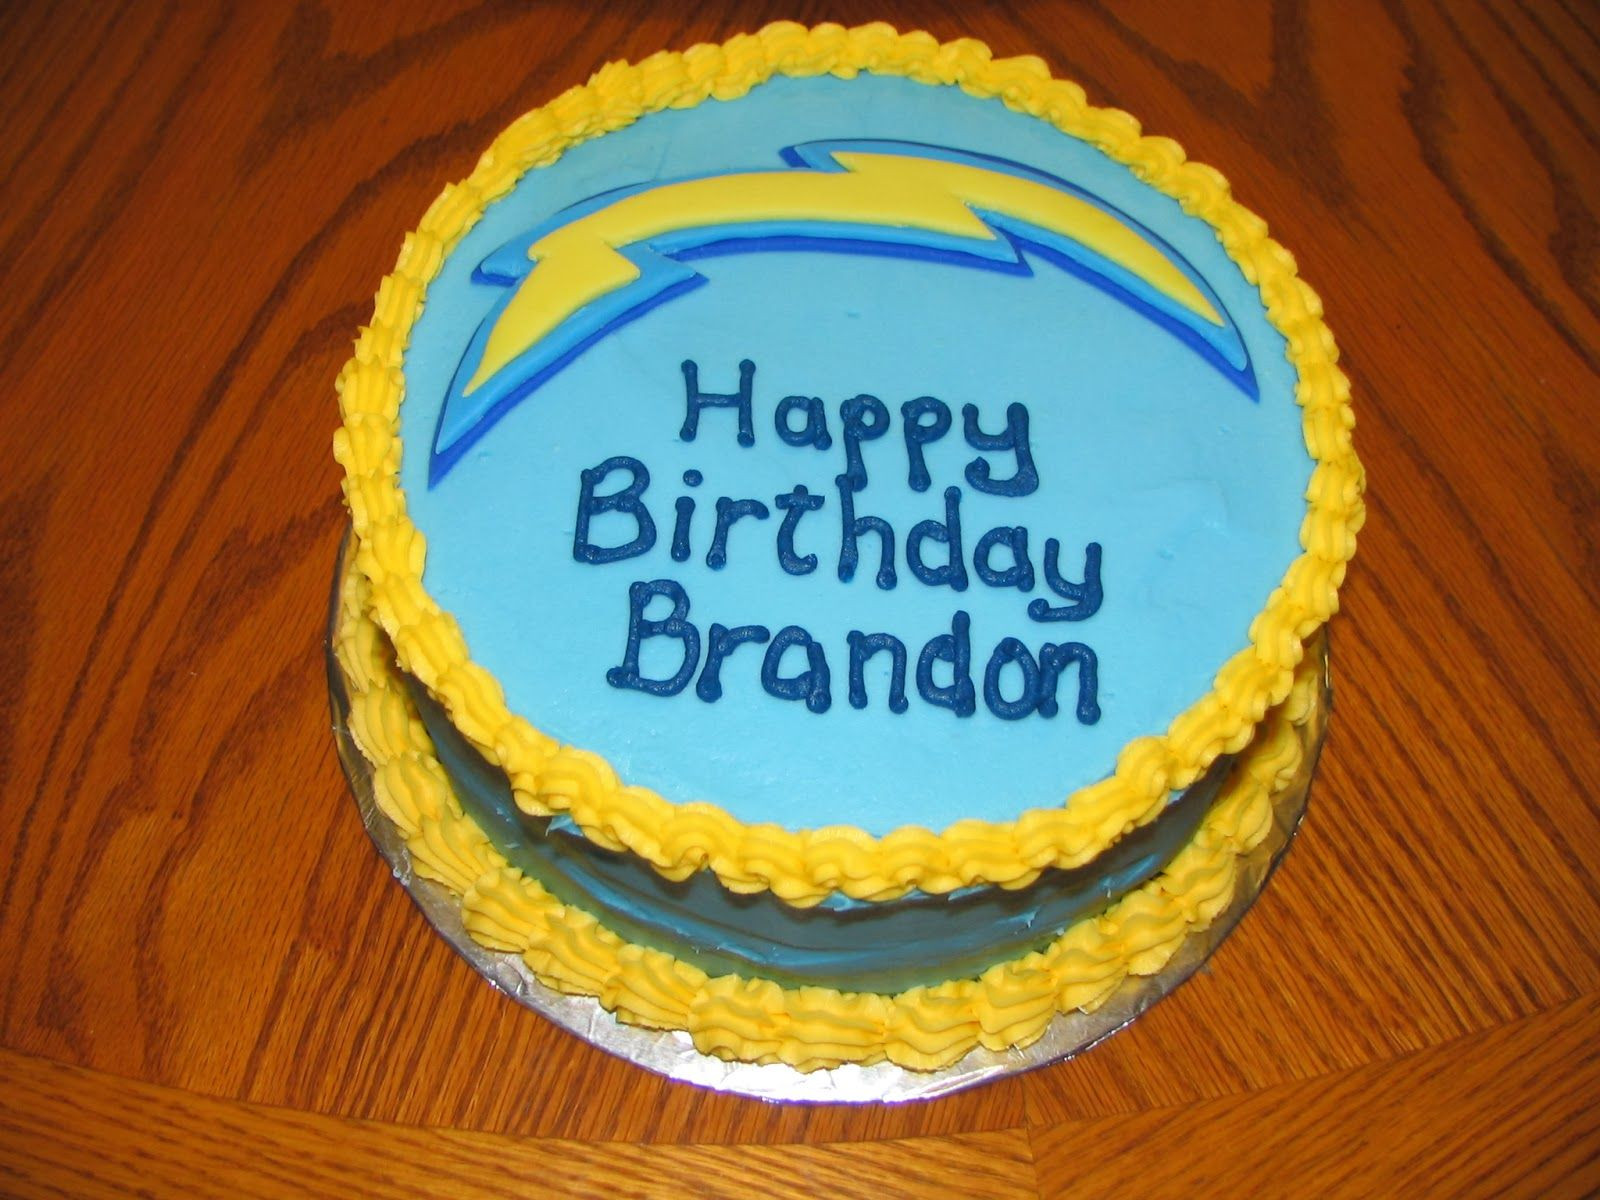 Birthday Cake San Diego
 San Diego Chargers cake by Janet Clark Piped Dreams